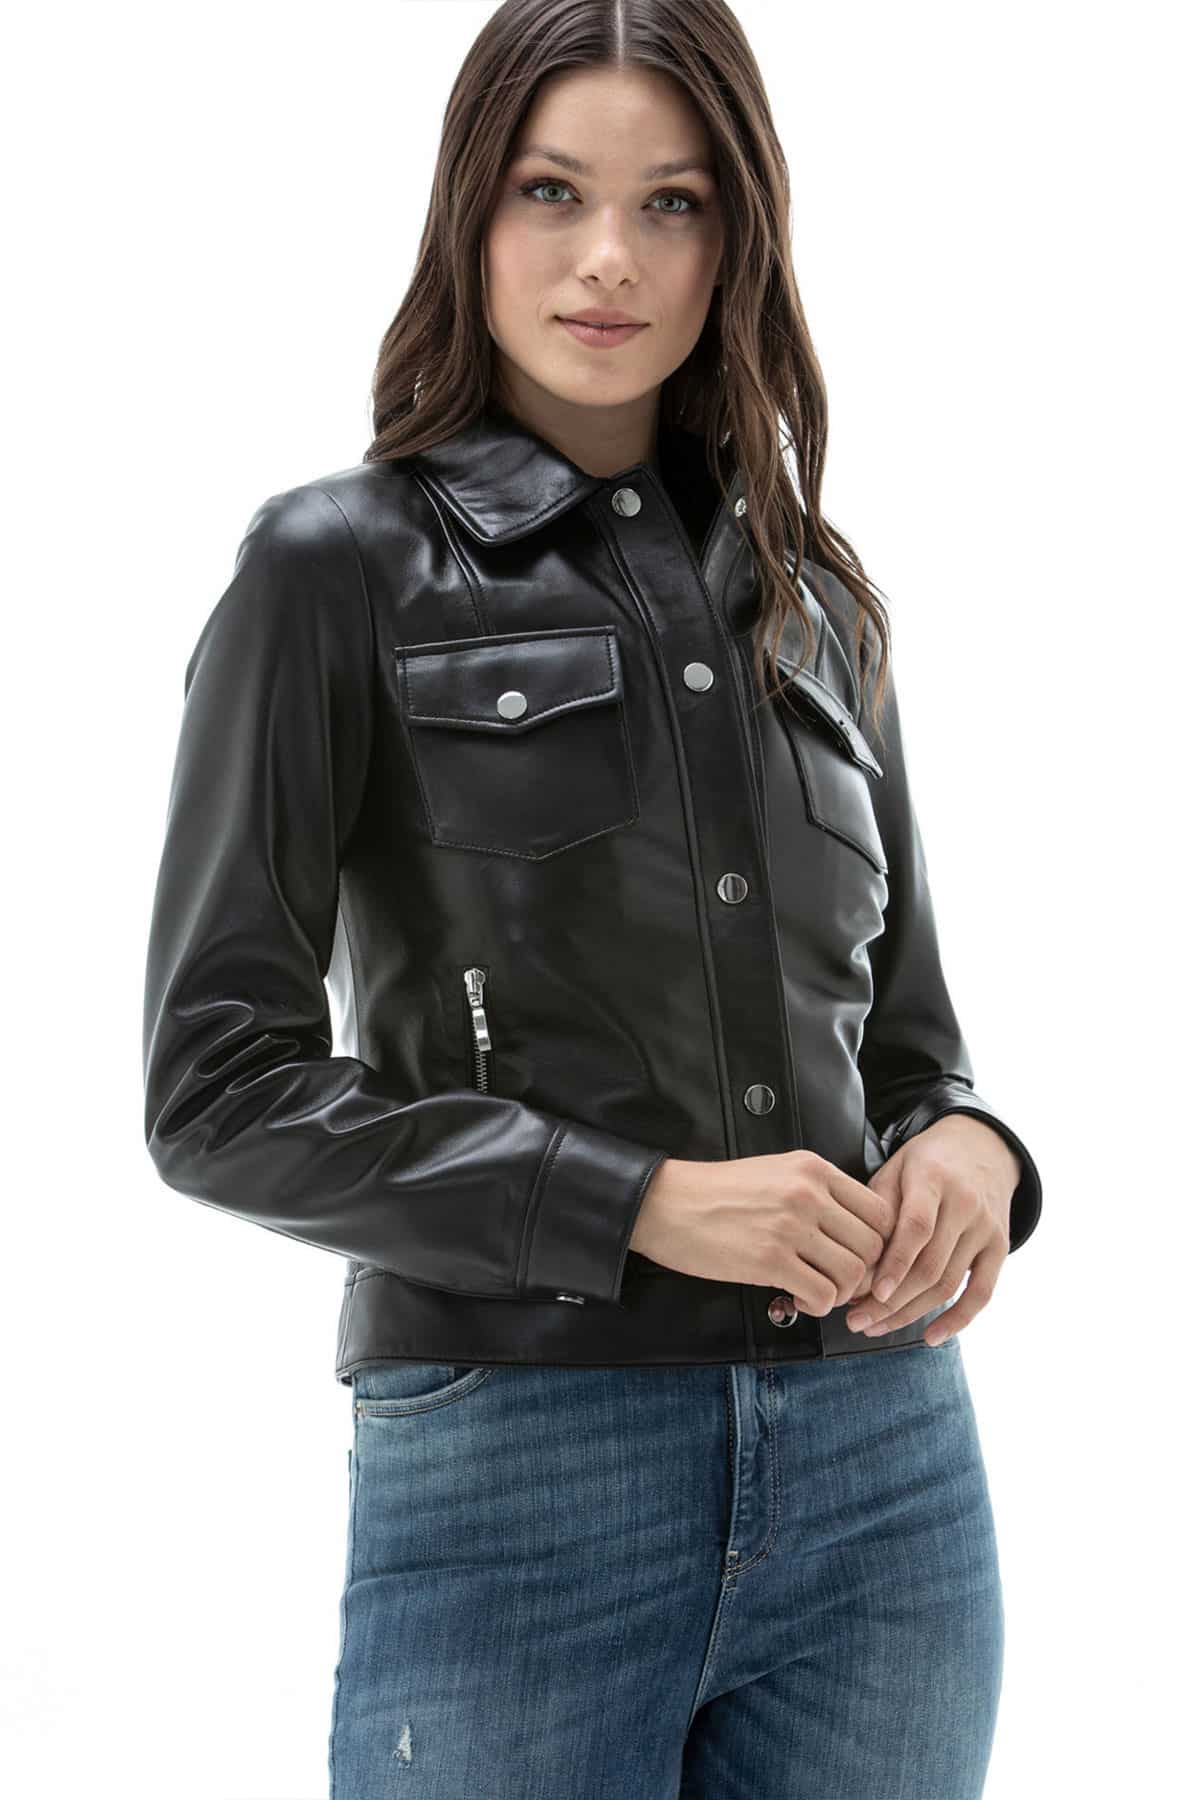 Mayfair Women's 100% Real Black Leather Shirt Style Jacket